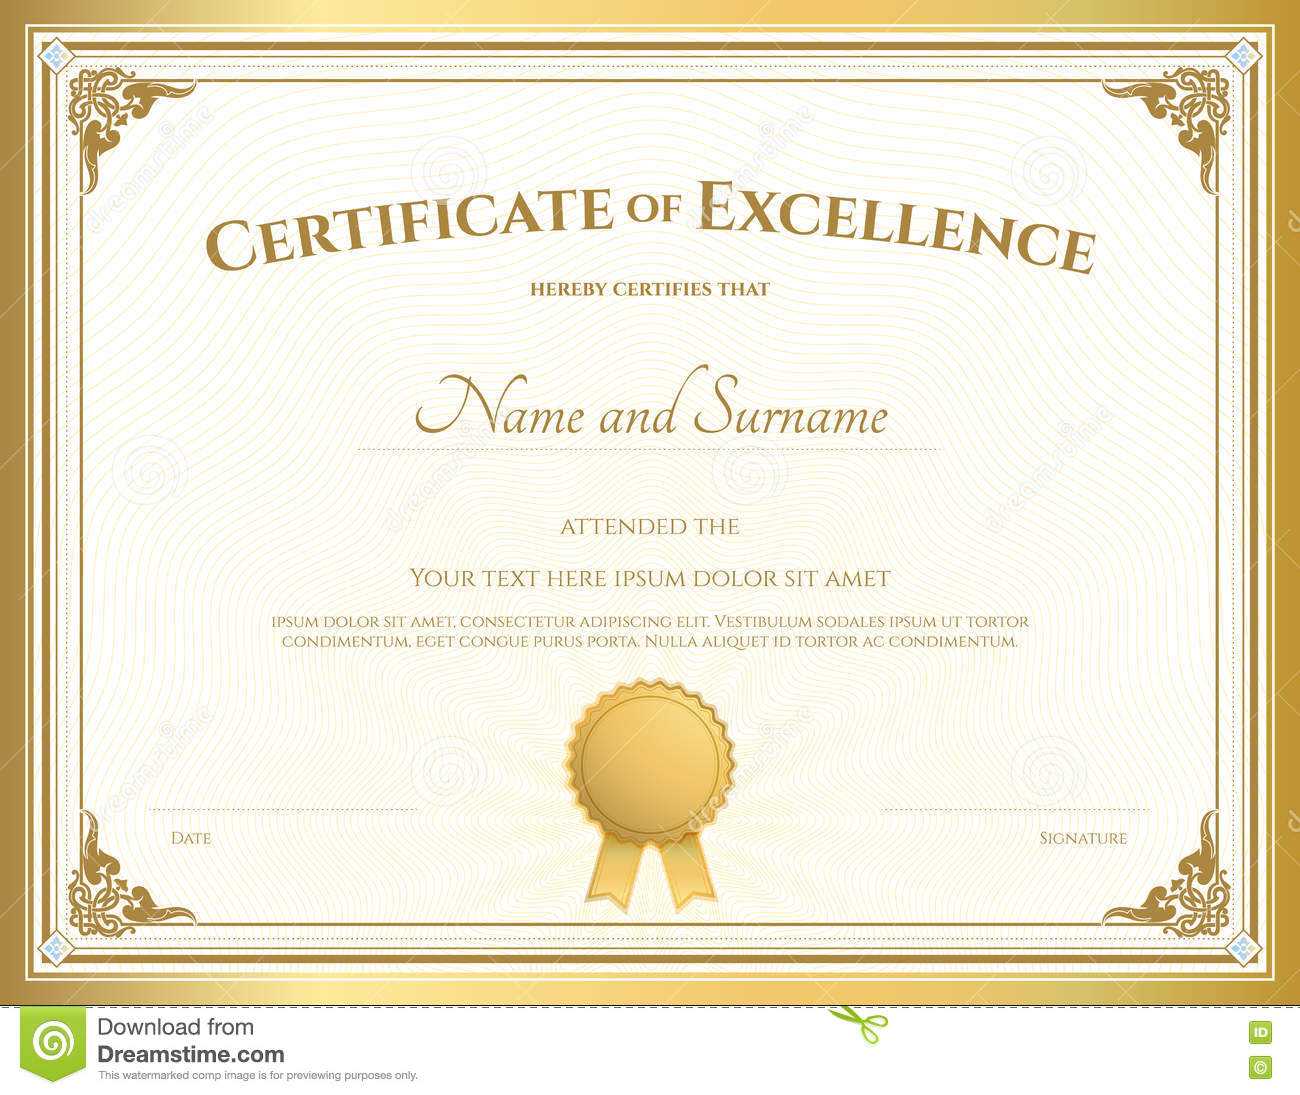 Certificate Of Excellence Template With Gold Border Stock With Certificate Of Excellence Template Free Download